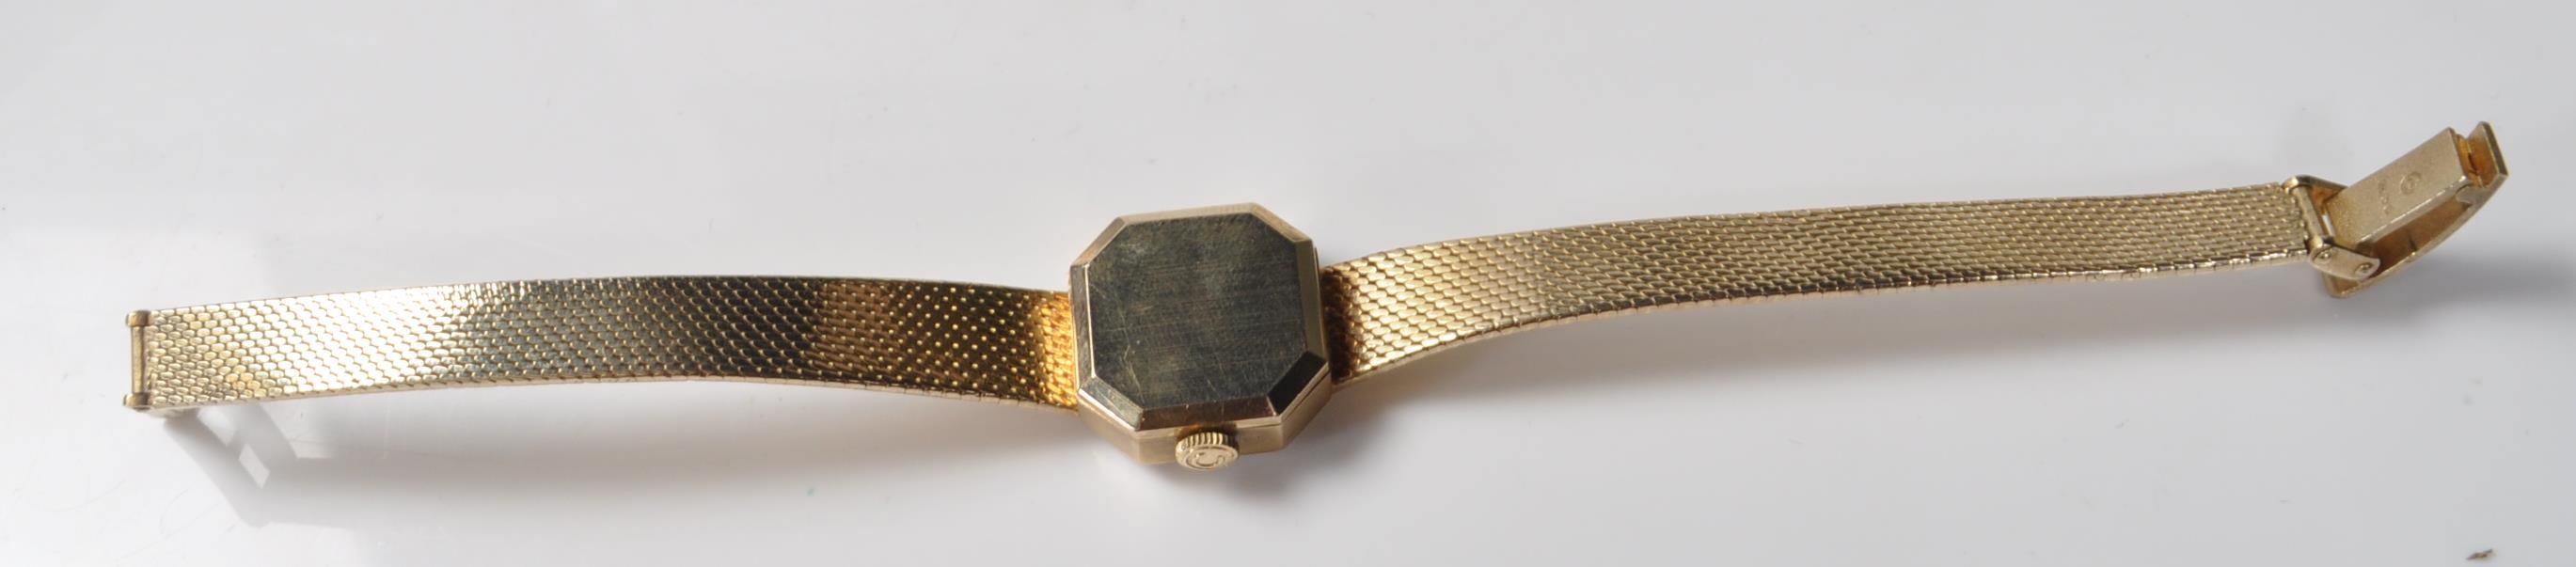 STAMPED 9CT GOLD CERTINA LADIES COCKTAIL WATCH - Image 5 of 9